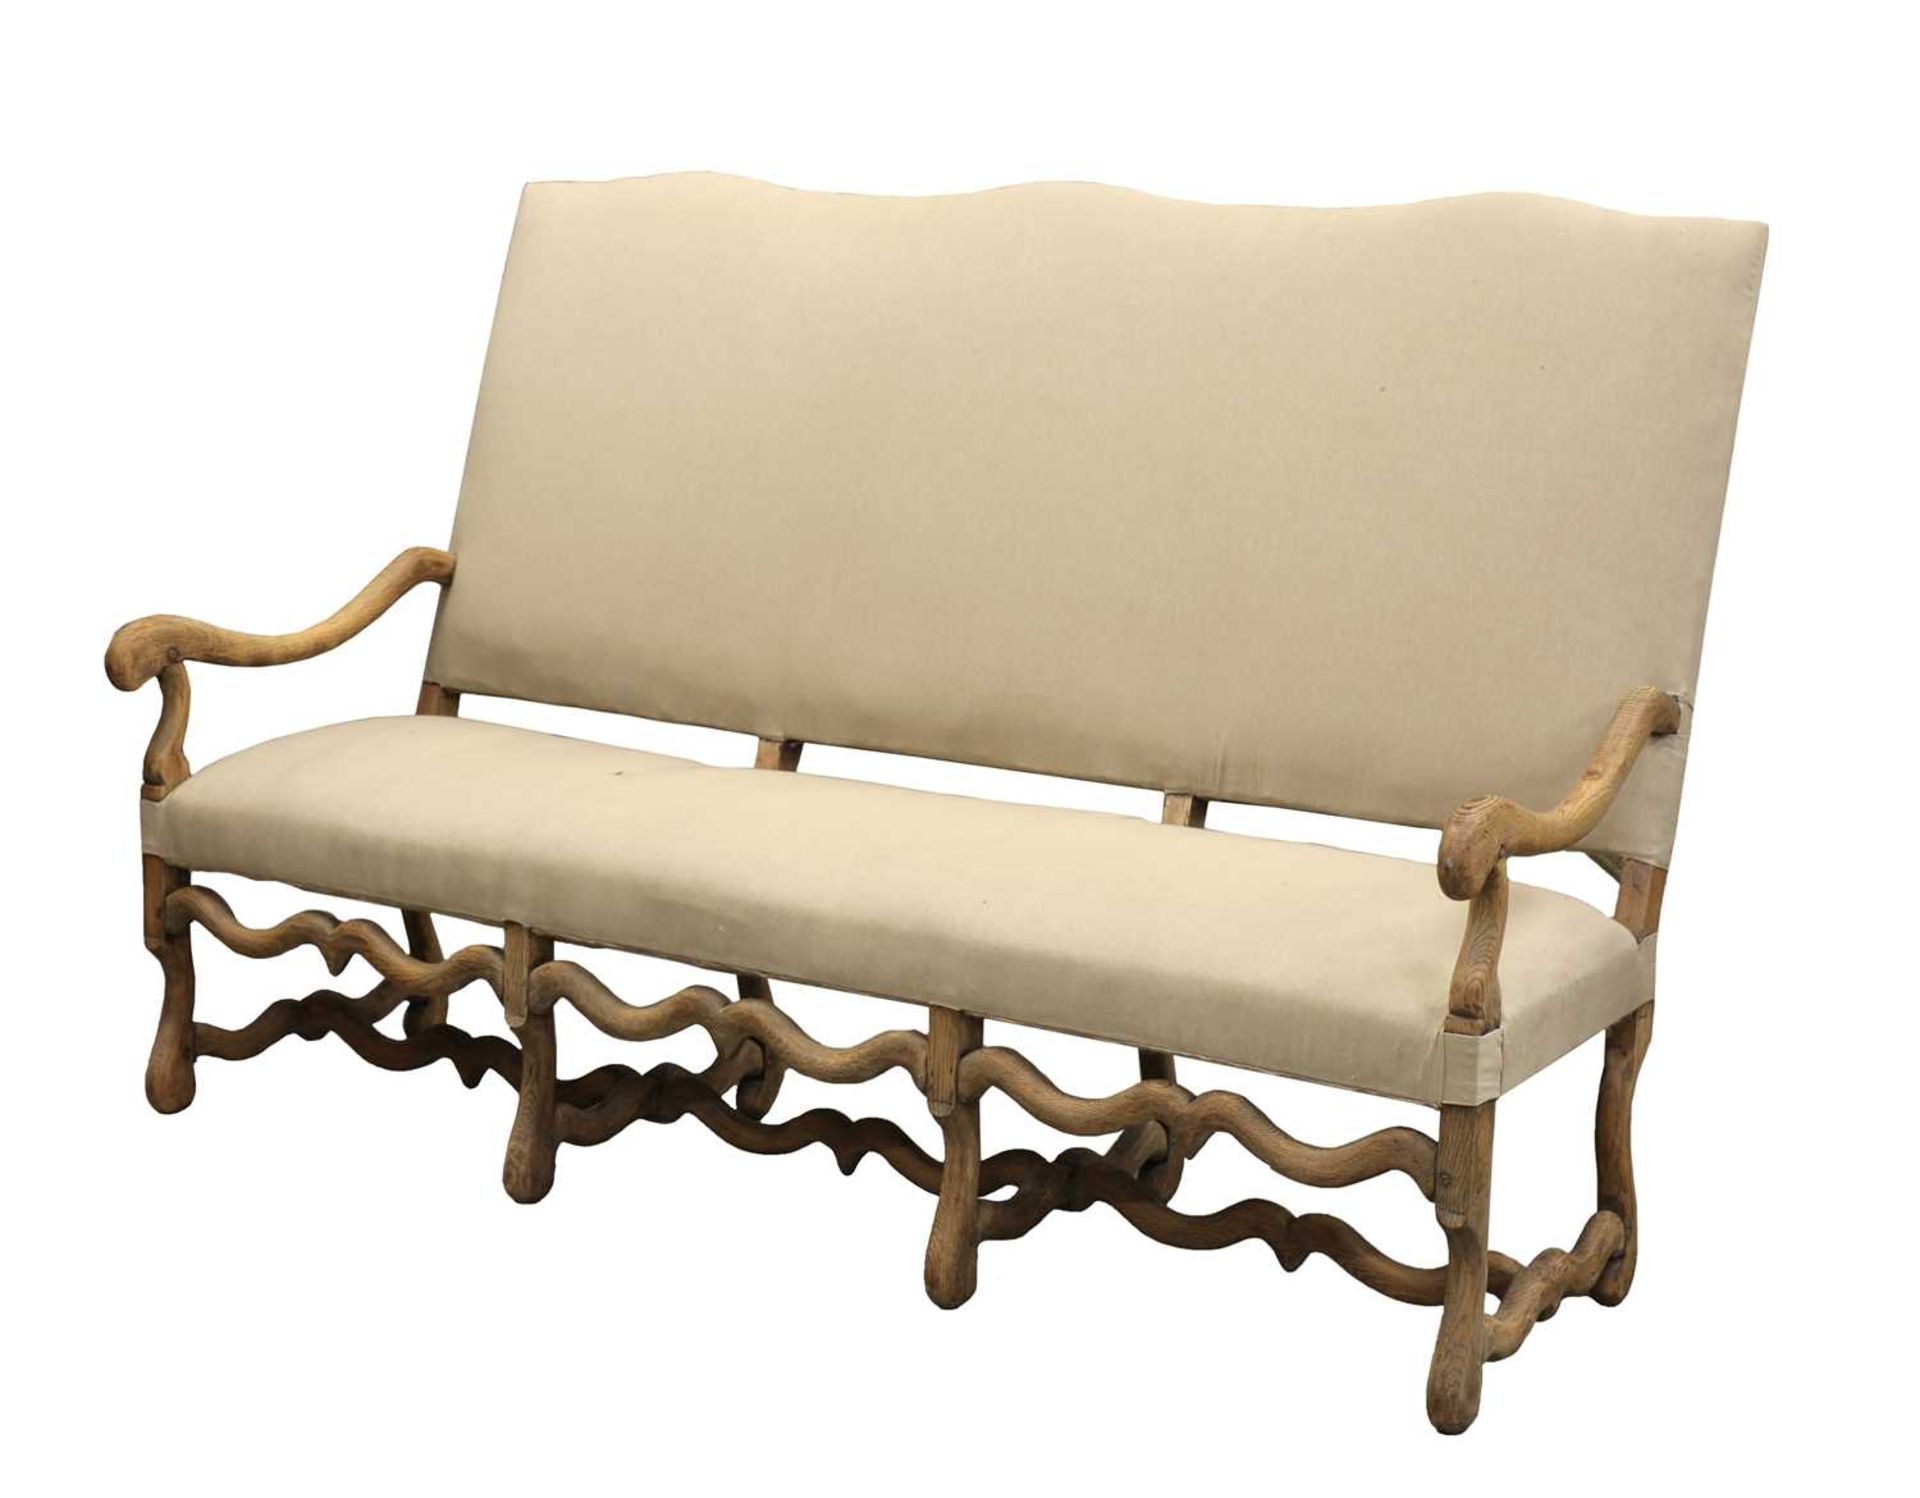 A French bleached oak three-seater sofa, - Image 6 of 6